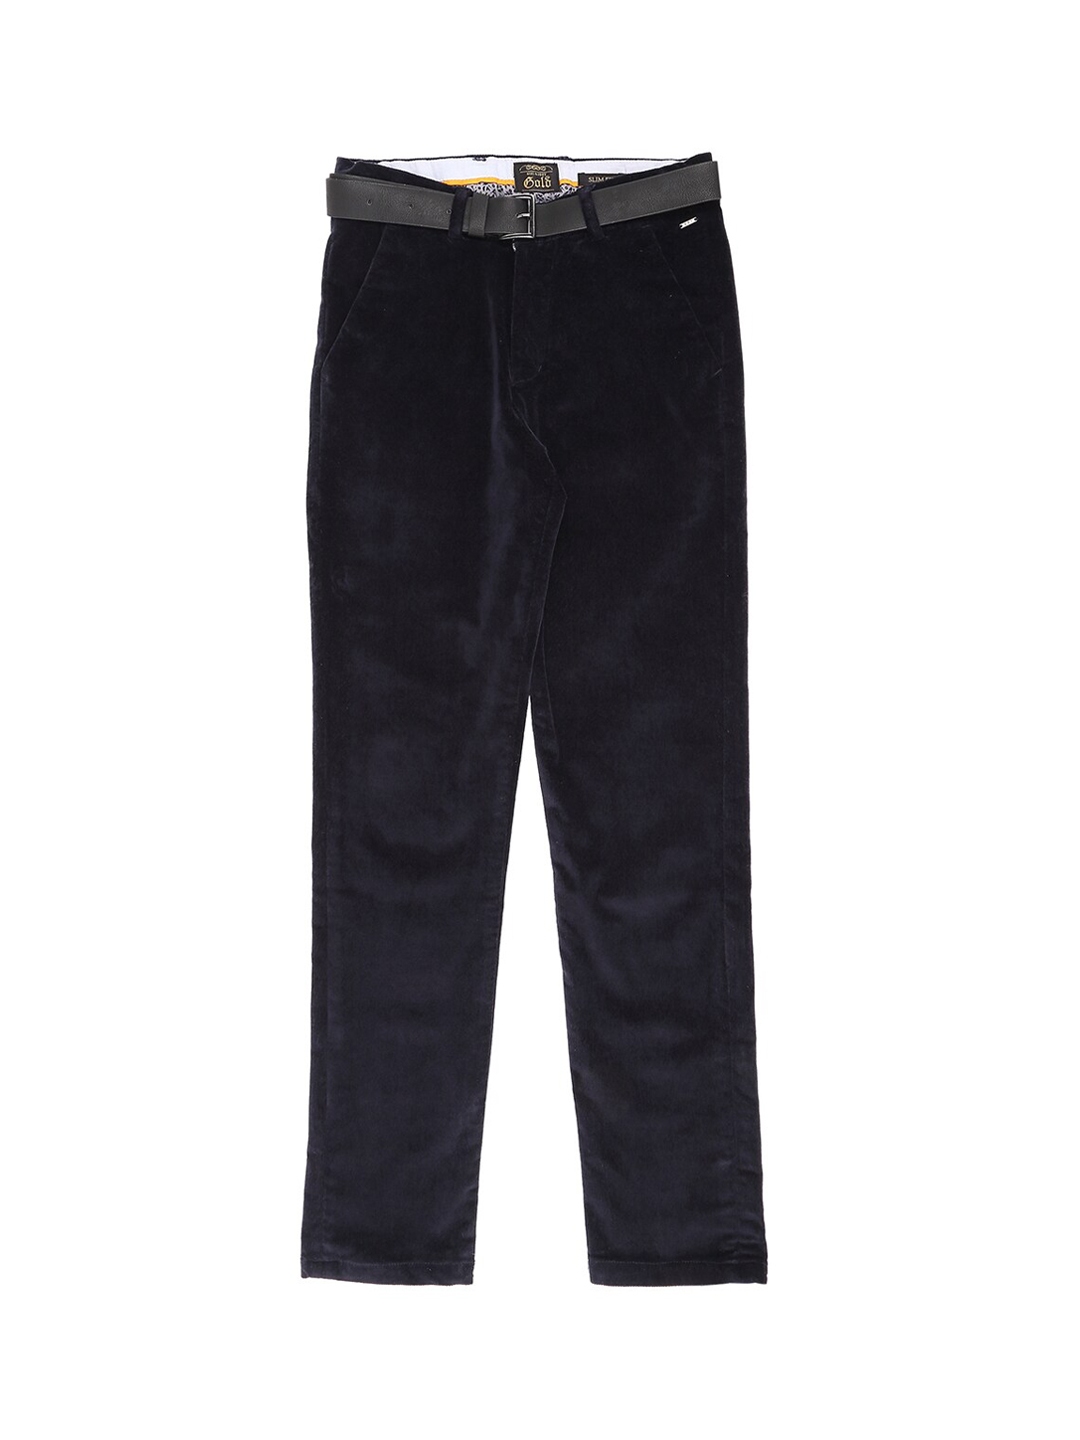 Buy Gini And Jony Boys Black Trousers - Trousers for Boys 18680054 | Myntra